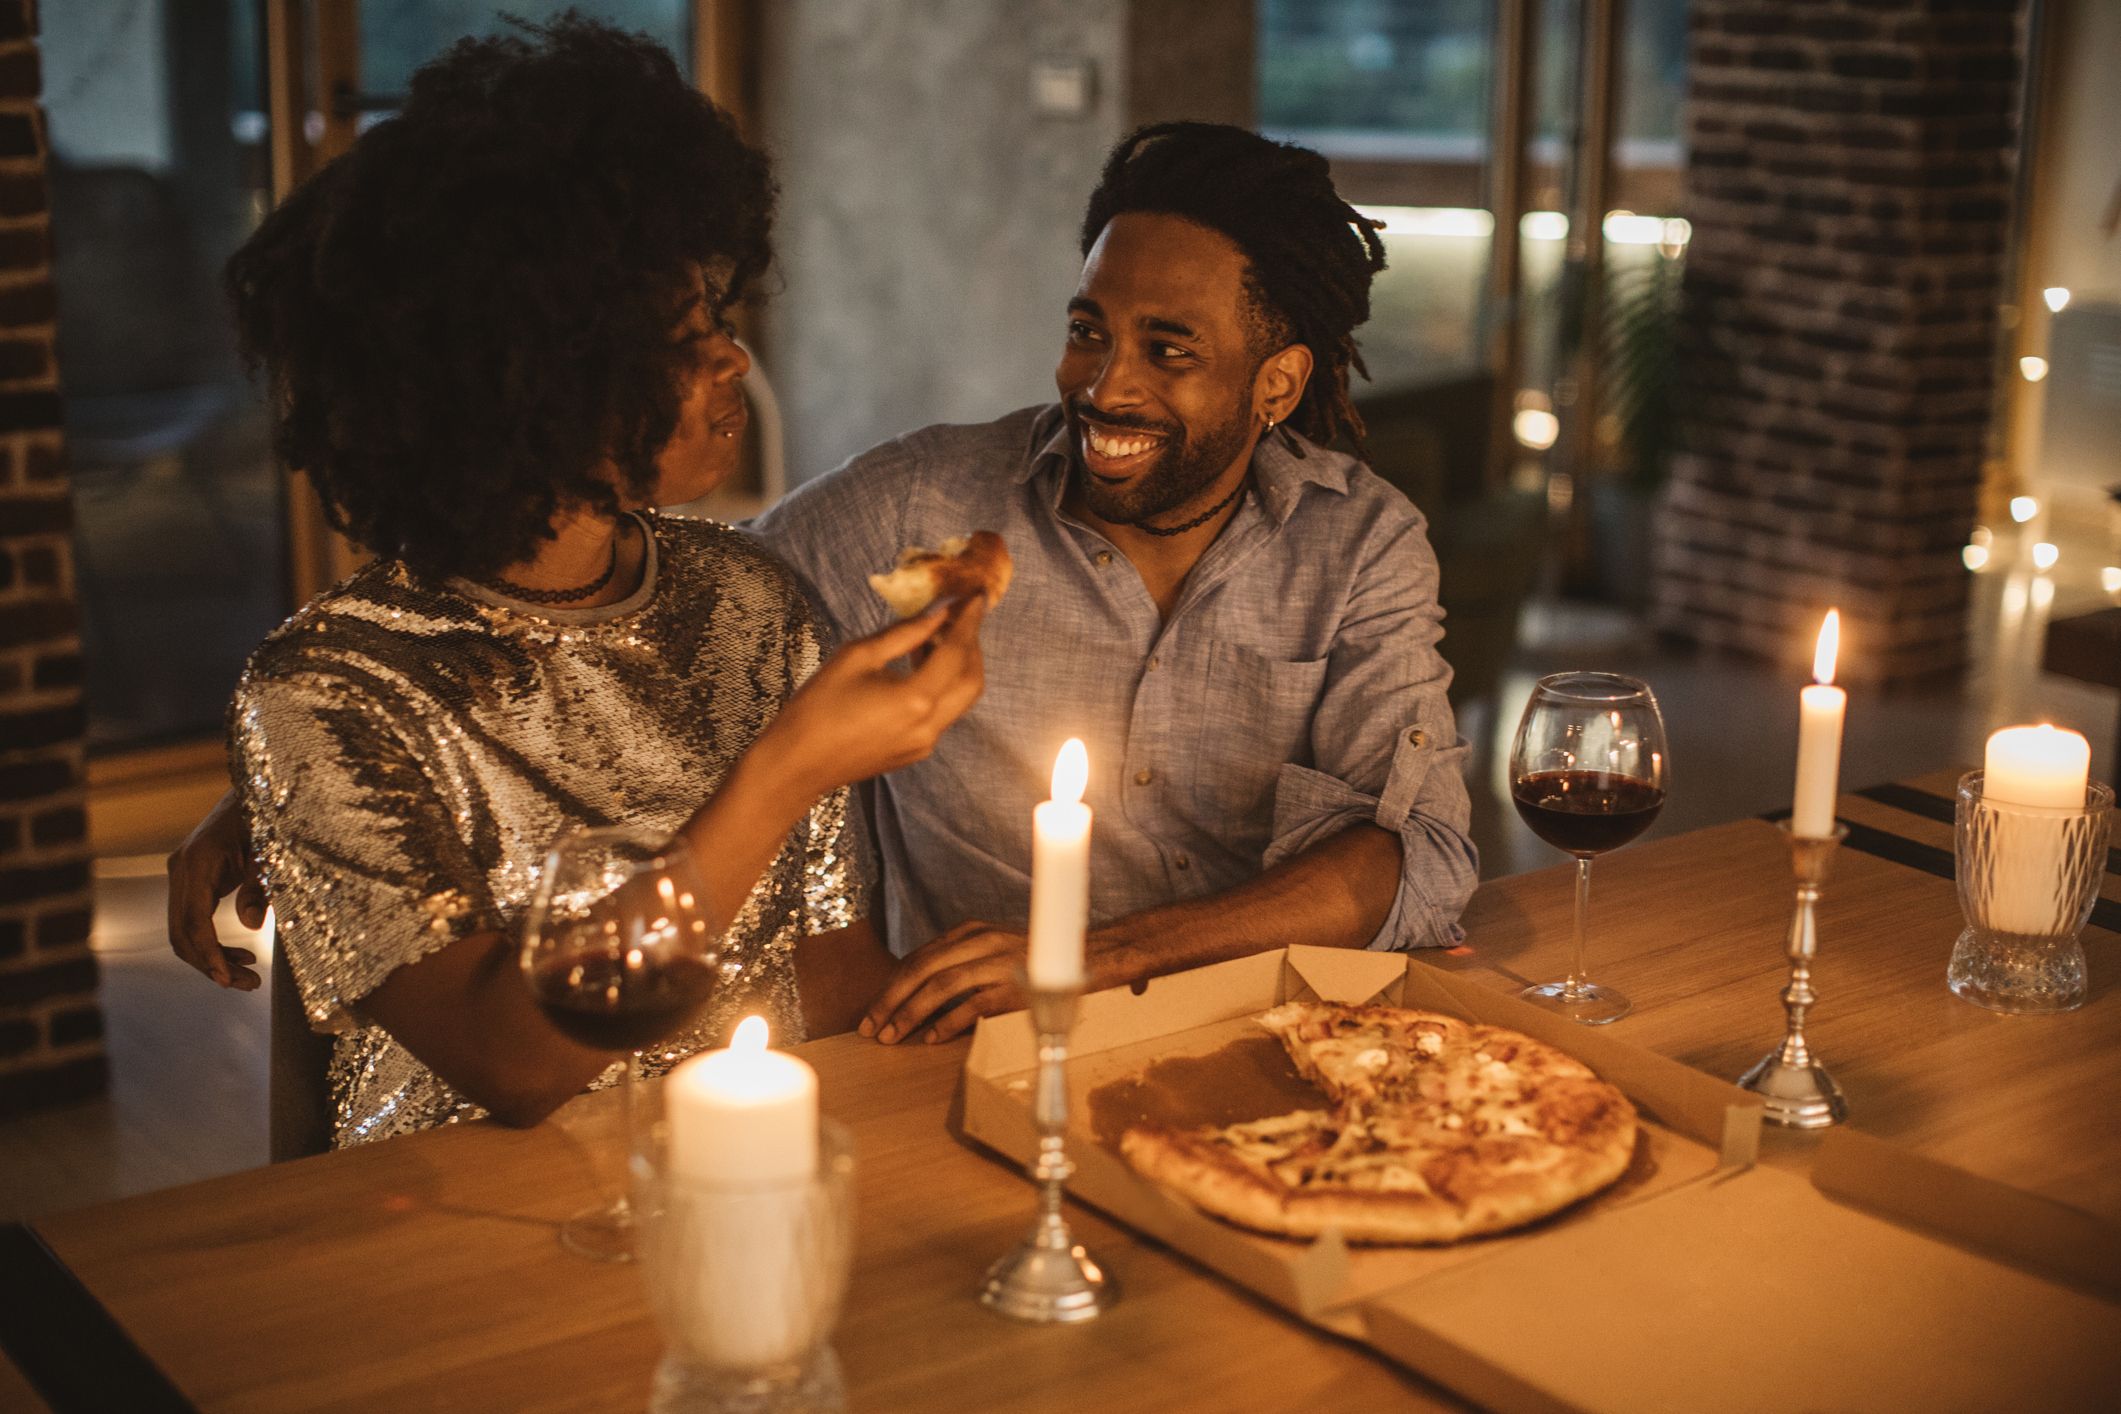 15 Fun Date Night Ideas For Couples That Feel Special Any Time pic